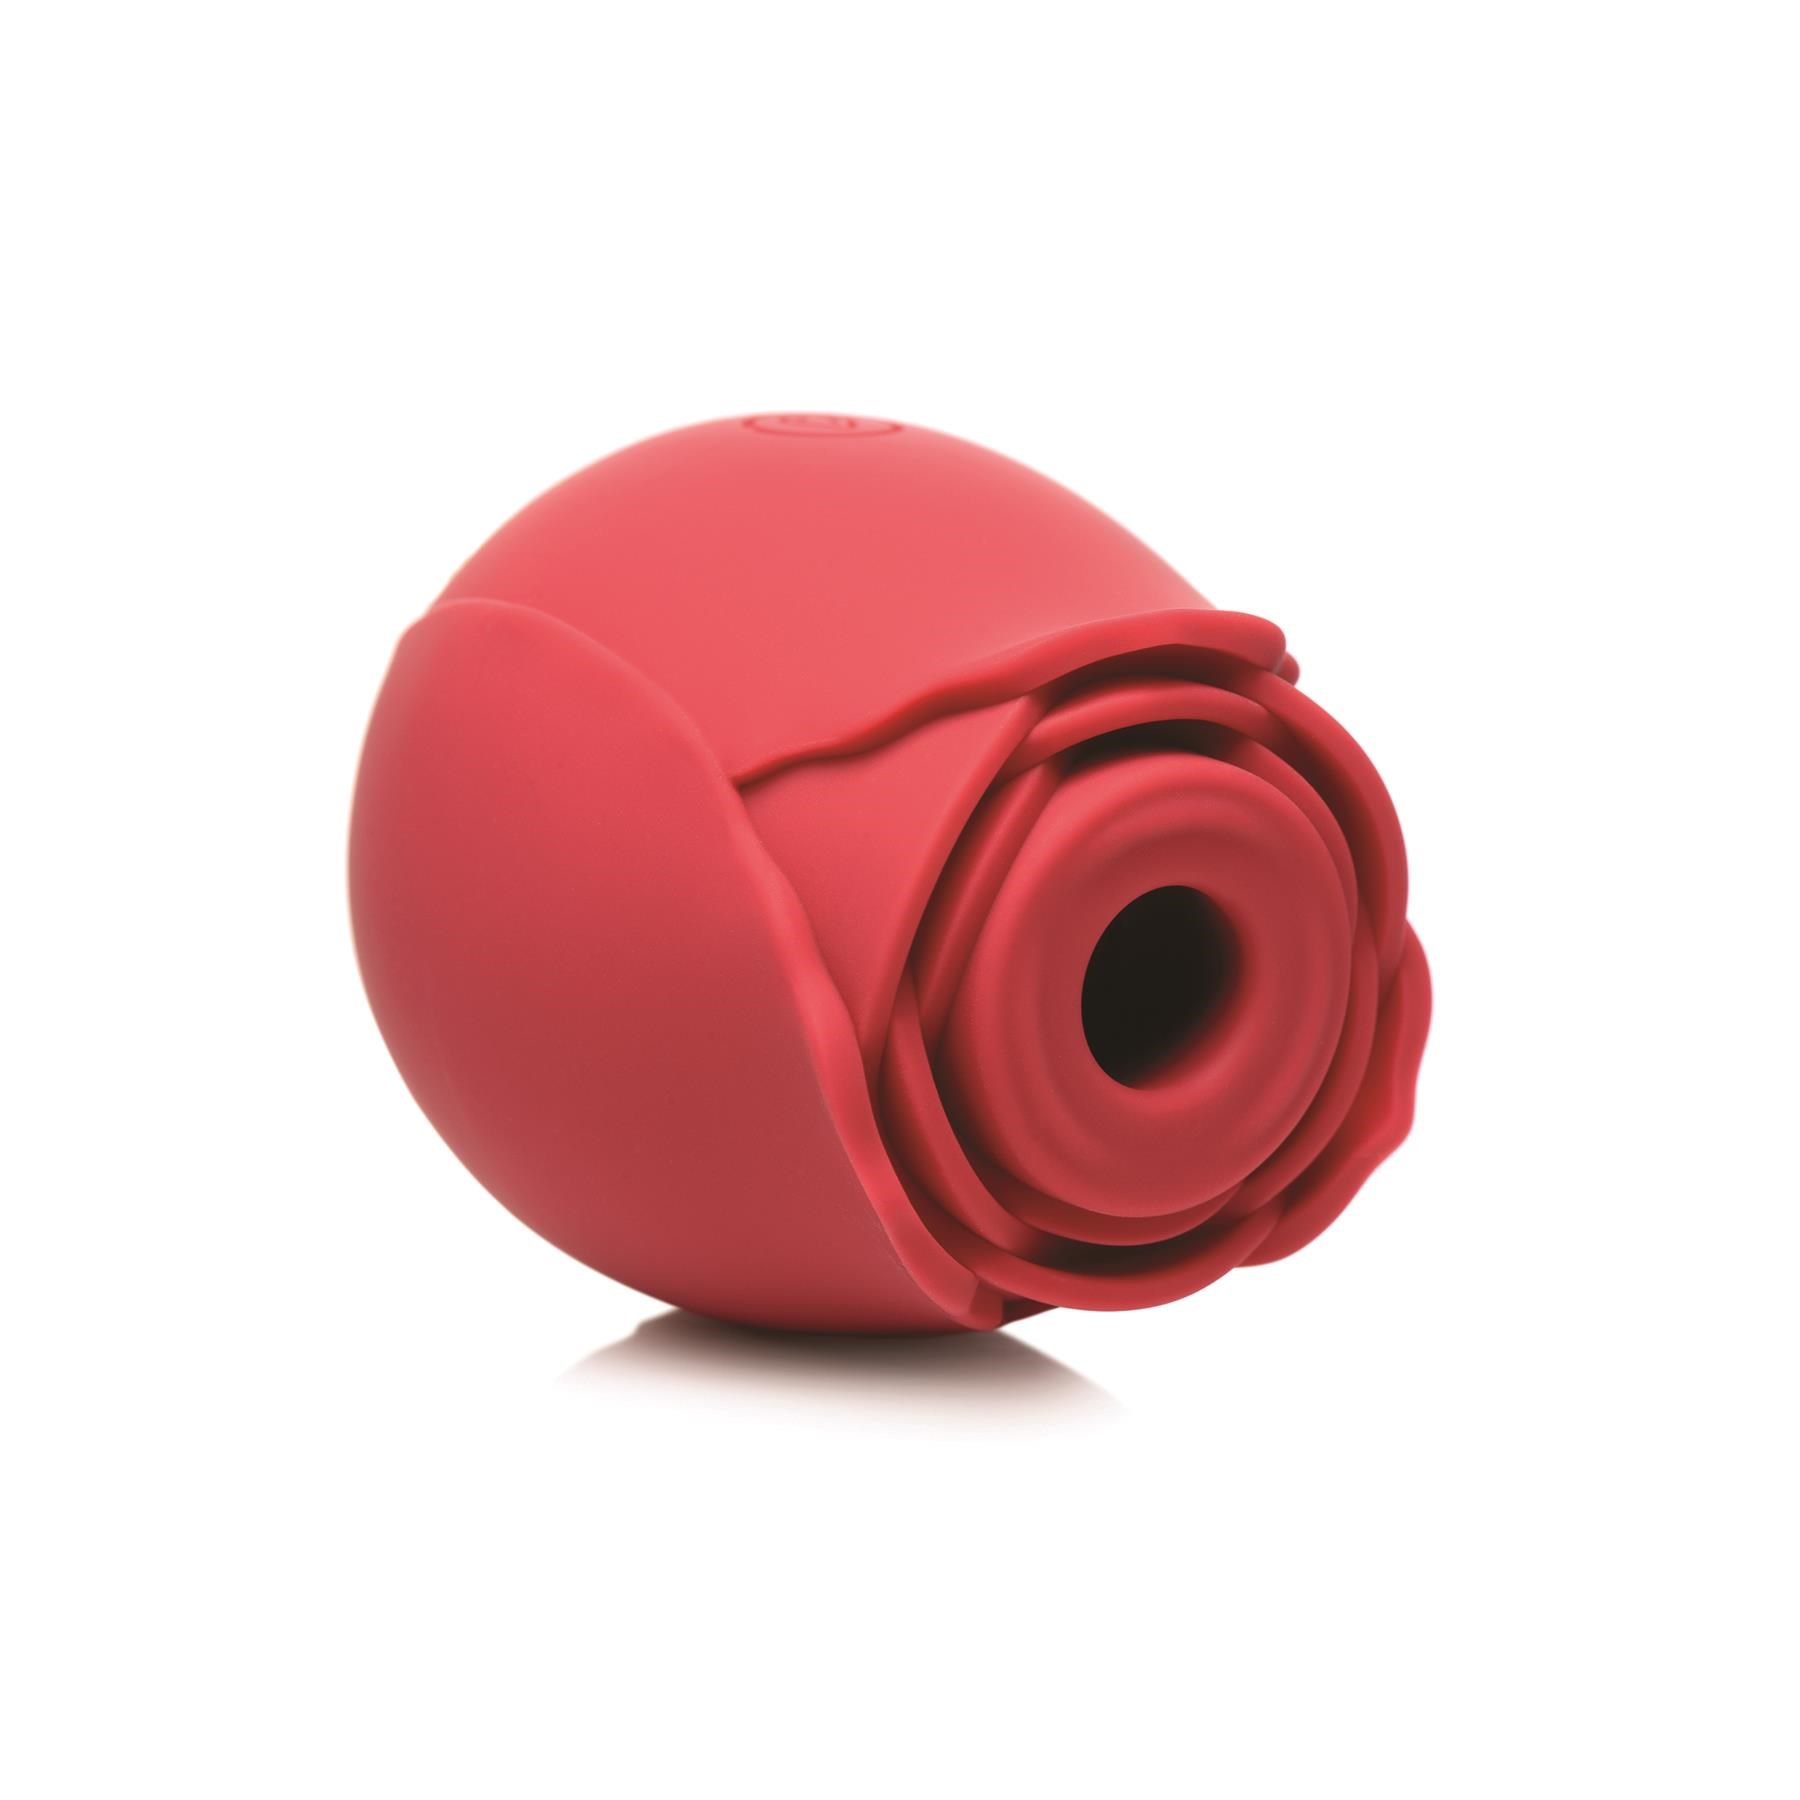 Bloomgasm Suction Rose Clitoral Stimulator To the Side - Red